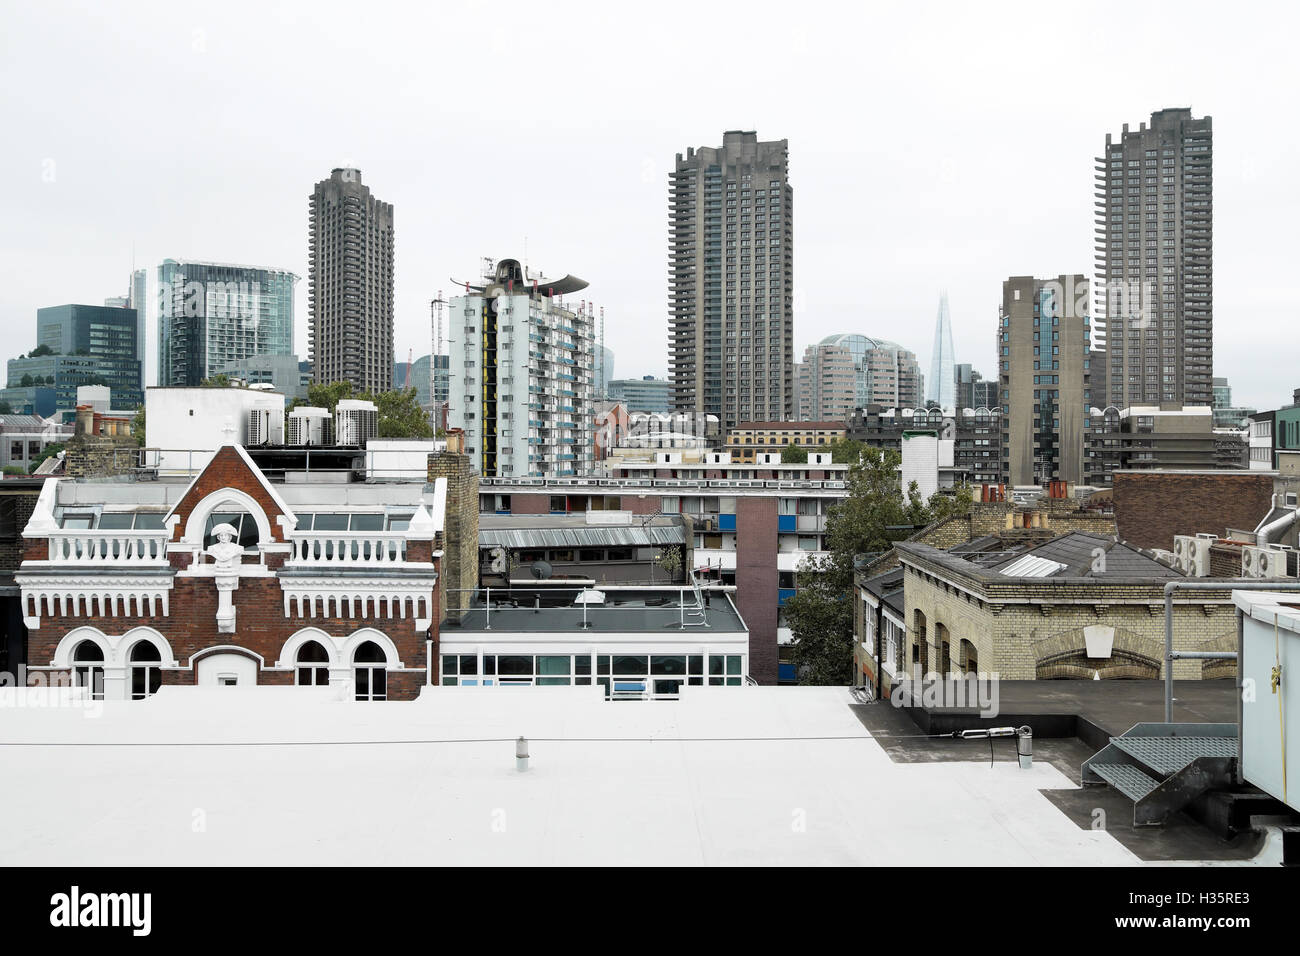 London skyline view of Barbican Estate towers & contrasting new old  buildings from rooftop on Old Street East London UK   KATHY DEWITT Stock Photo